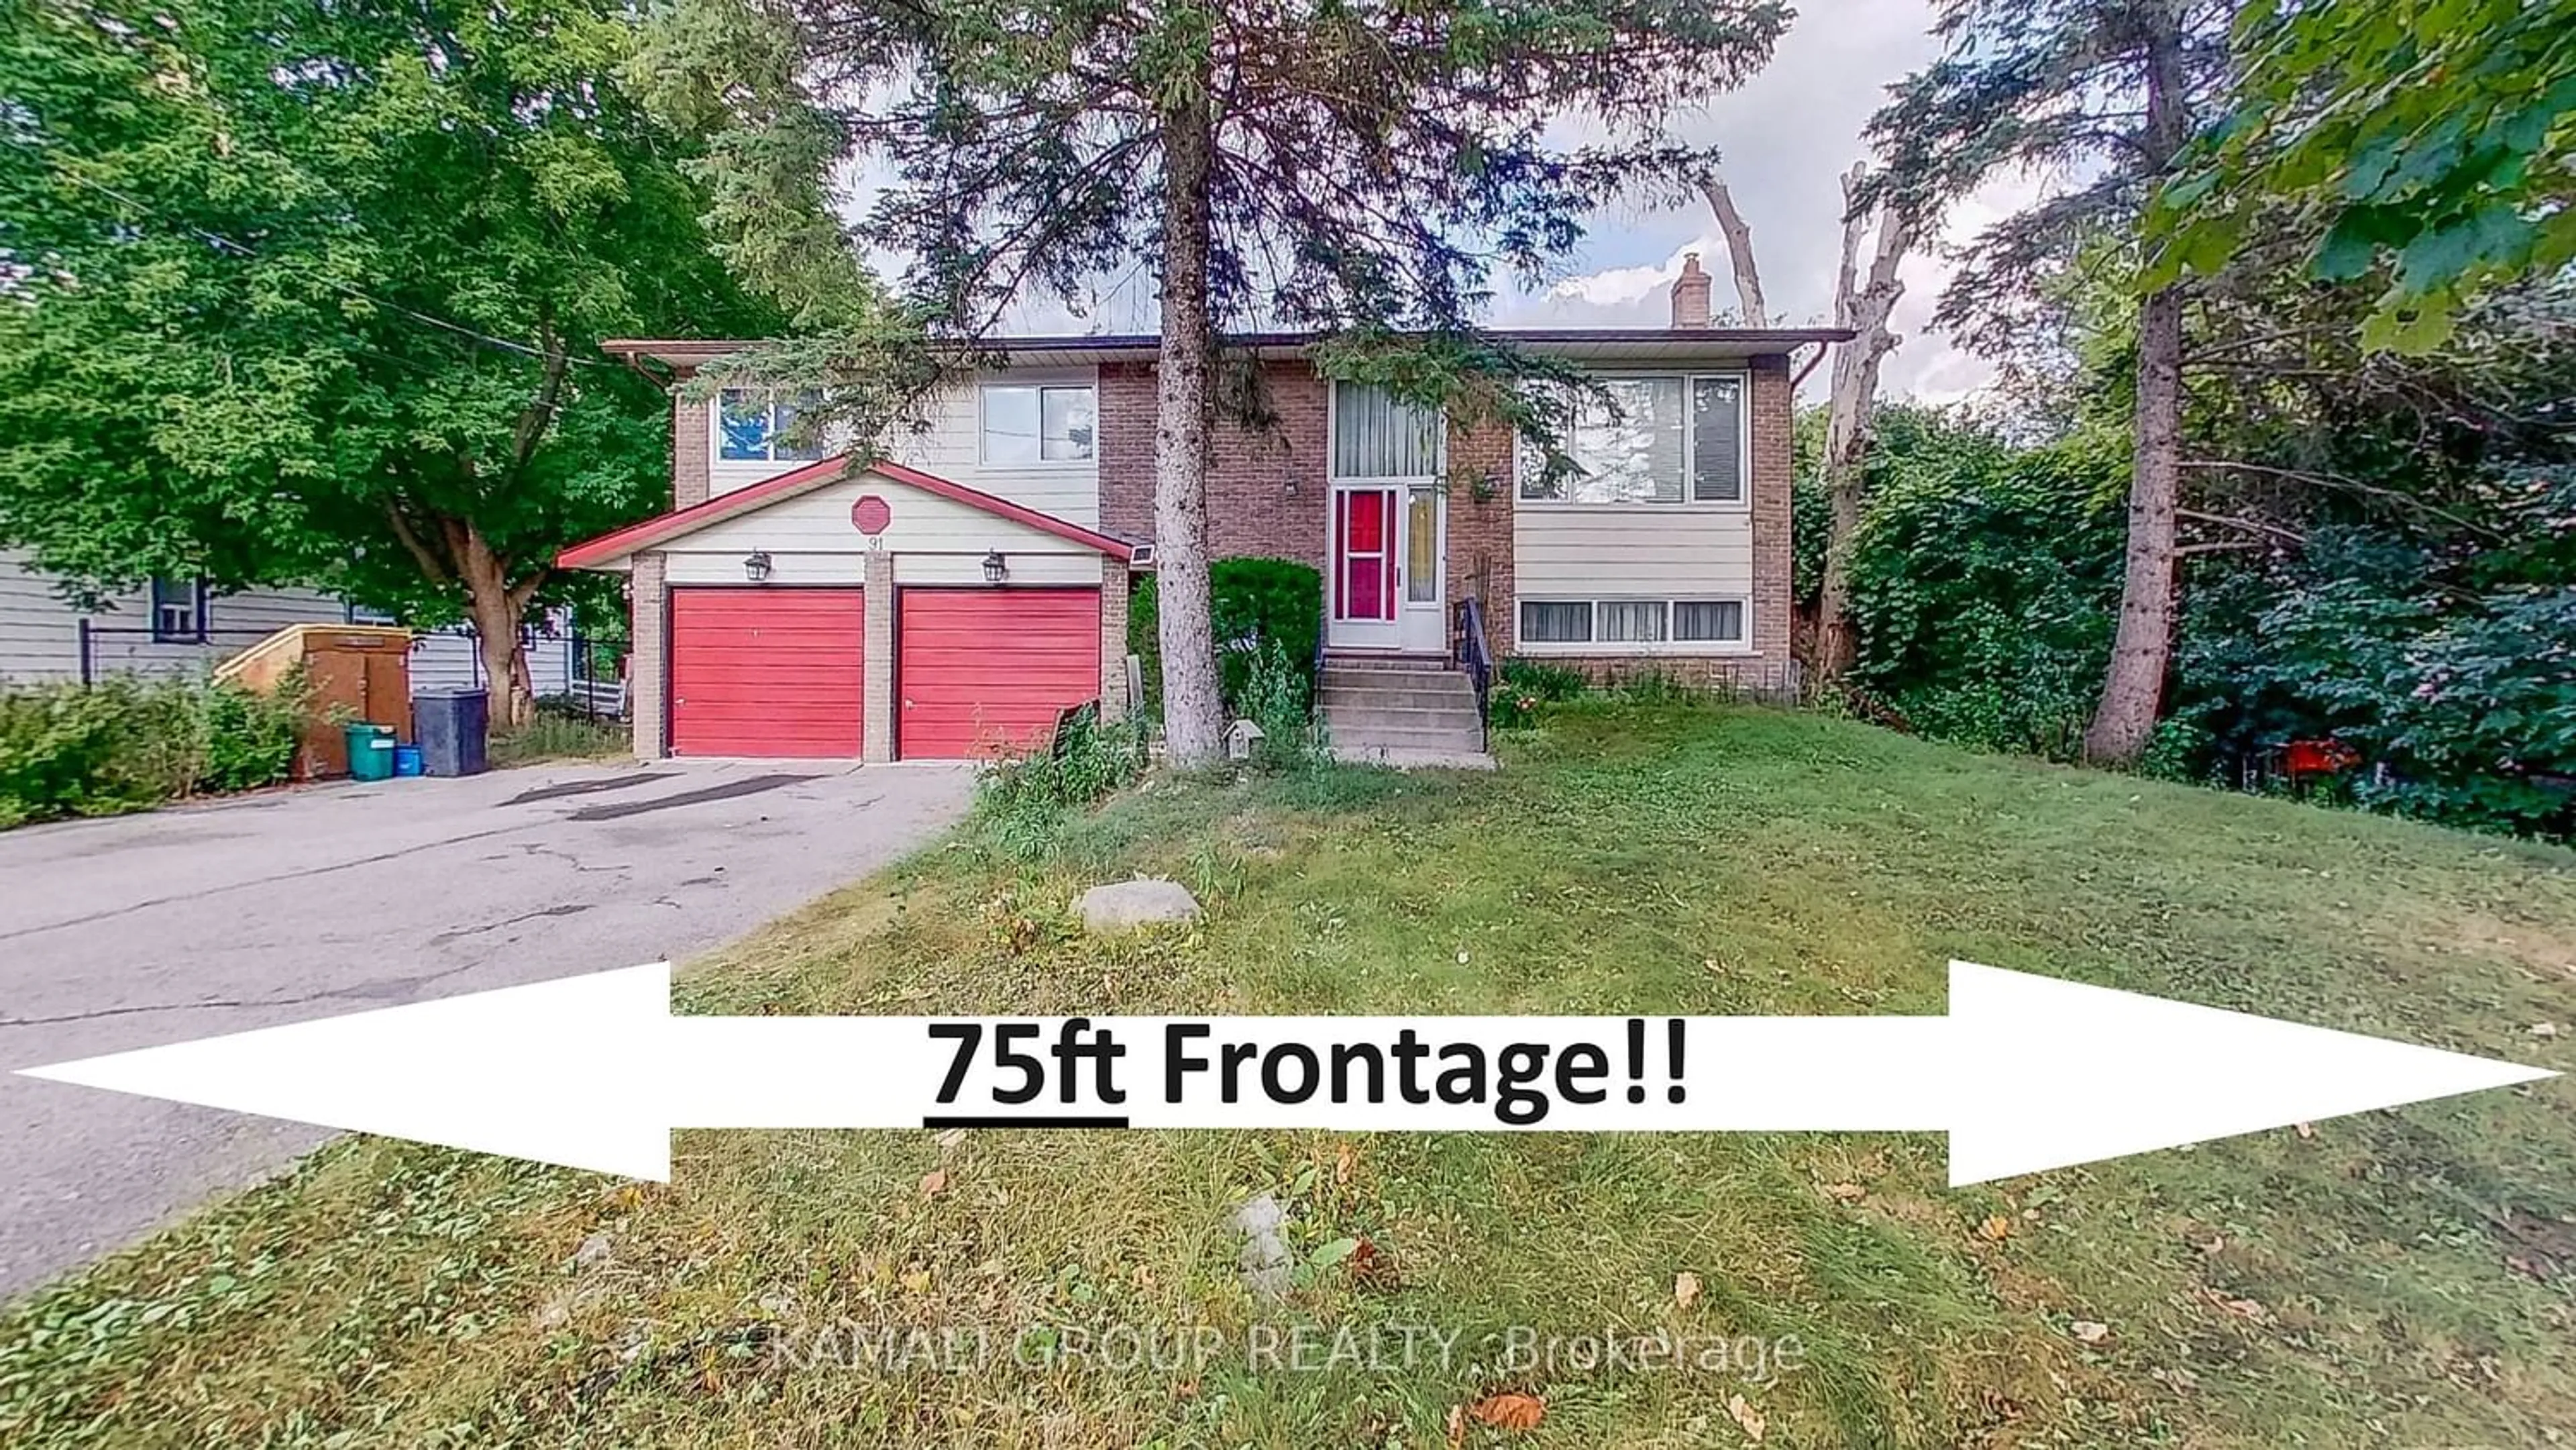 Frontside or backside of a home for 91 Fergus Ave, Richmond Hill Ontario L4E 3C2